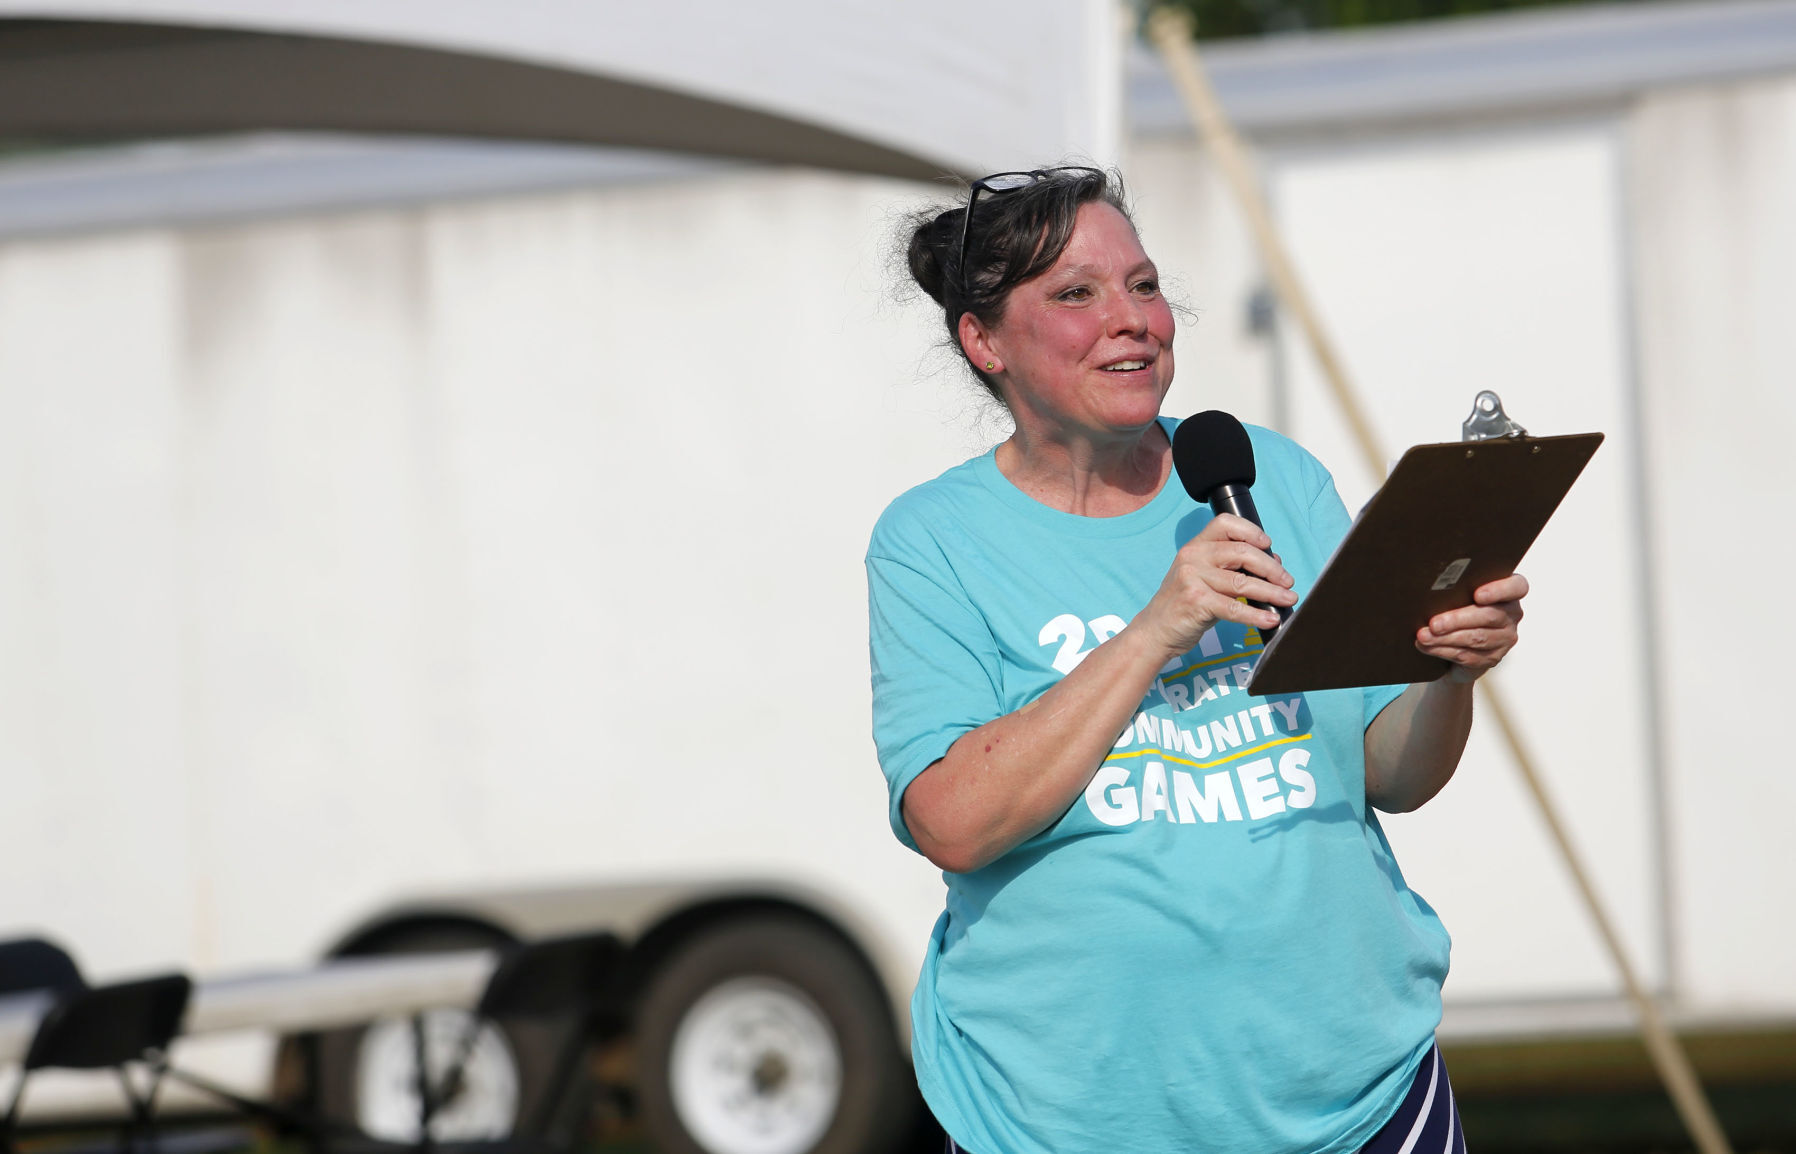 Area Residential Care Executive Director Sue Freeman gives opening remarks to local businesses that teamed up and competed at the Area Residential Care Corporate and Community Games at the Port of Dubuque on Friday, June 11. Photos by Katie Goodale    PHOTO CREDIT: Katie Goodale